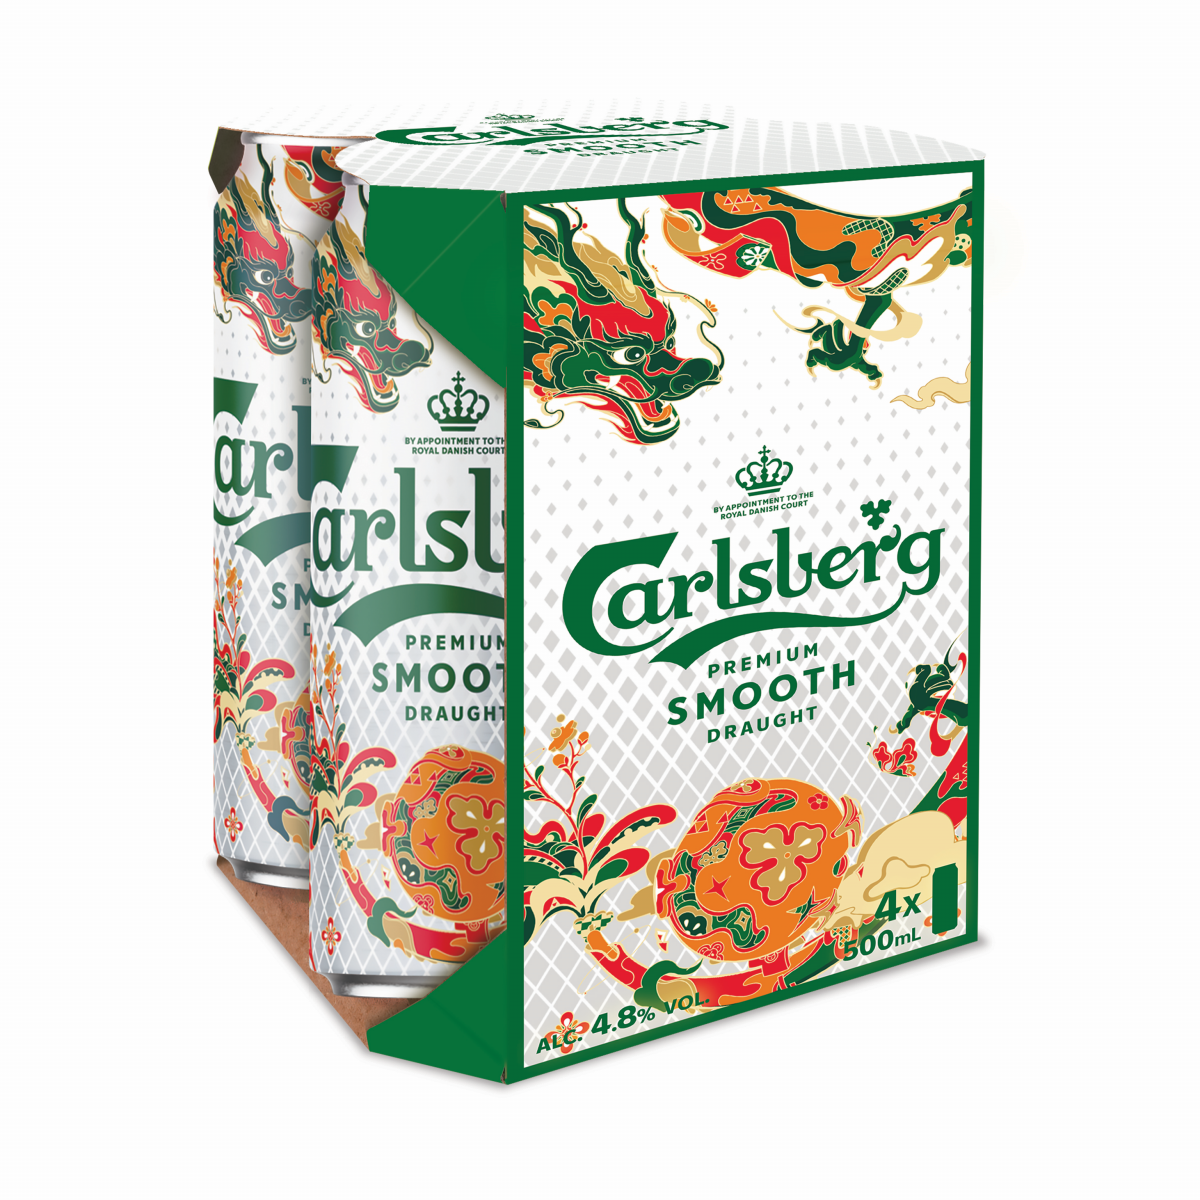 Carlsberg Smooth Draught Beer - Pilsner - 500ml x 4 can (Random allocation of CNY Special edition)